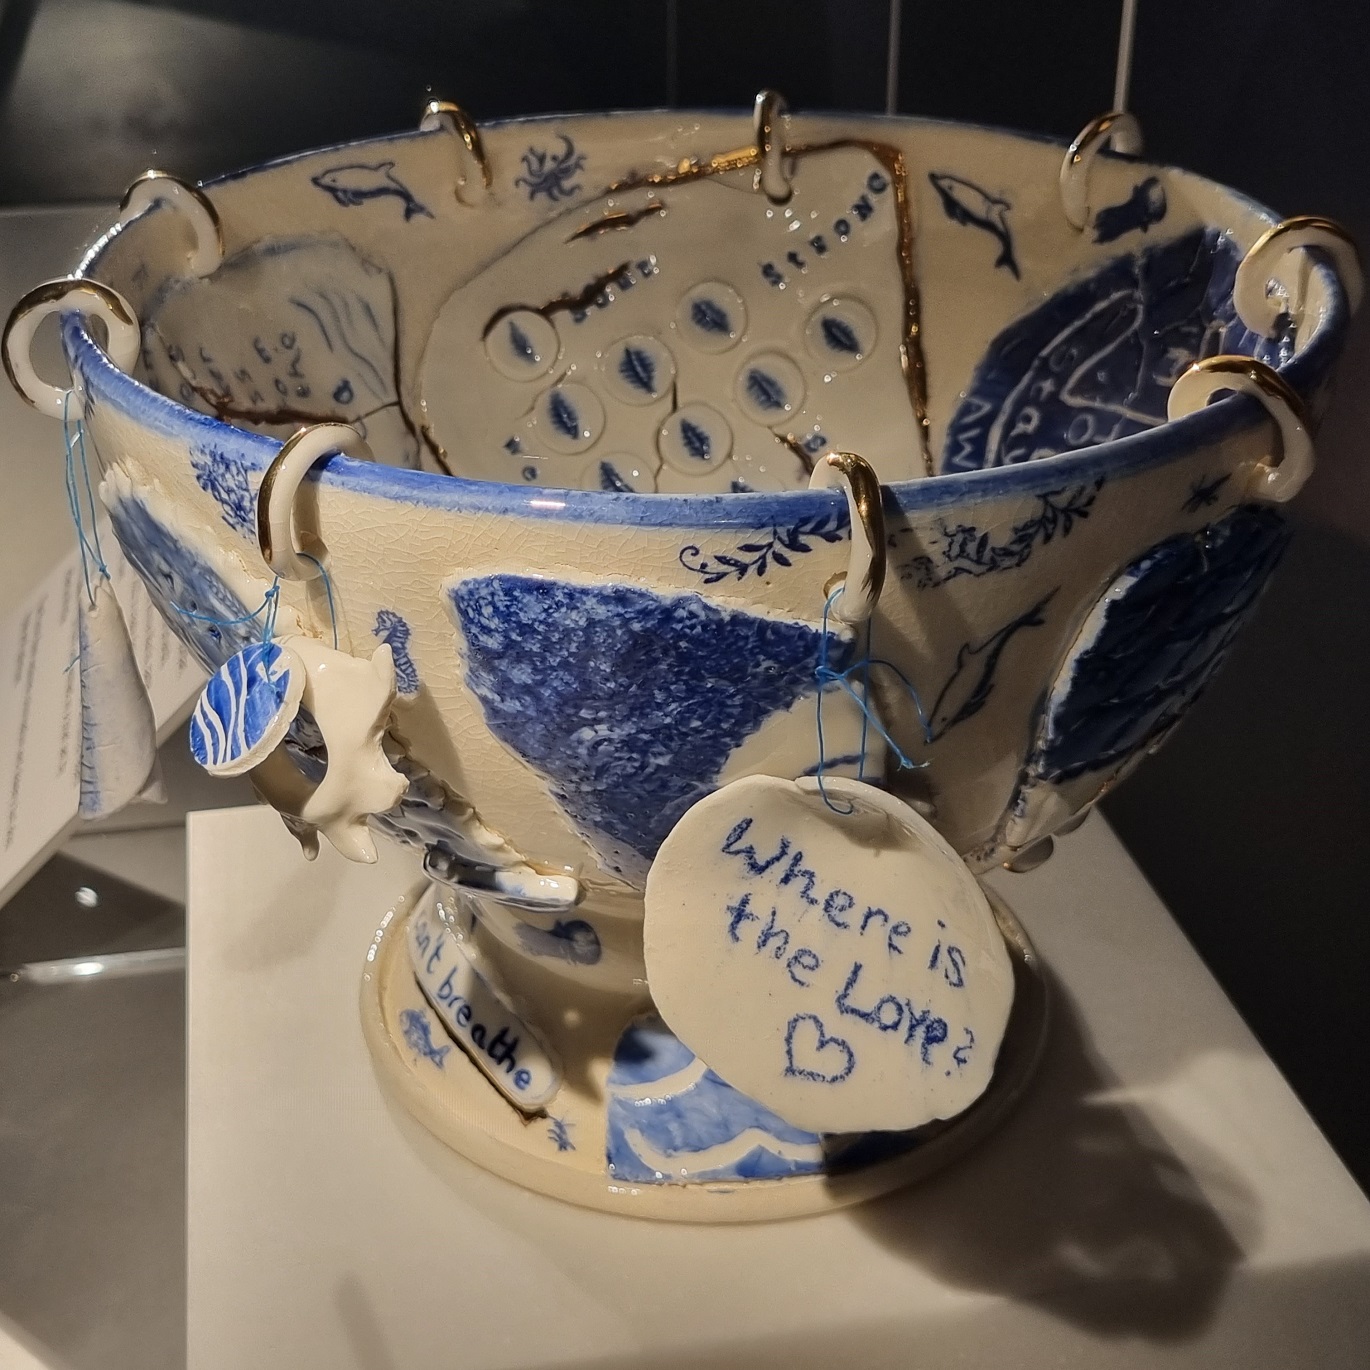 Image of Punch Bowl on display at The Box